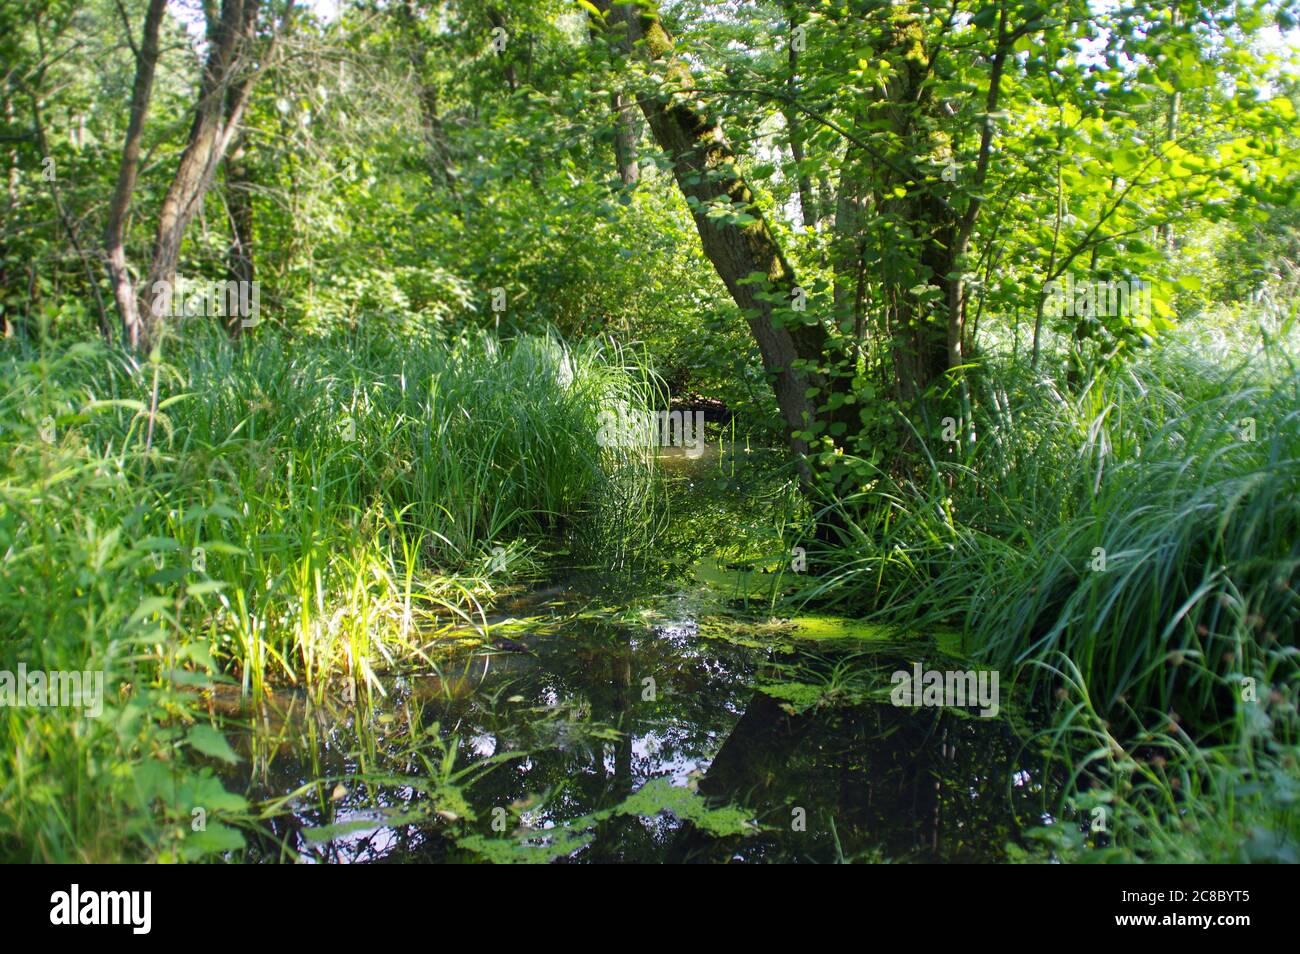 Natural wetland with the plants in water. Concept of nature, ecology and environment care. Restored water retention reservoirs. Green reeds in swamps Stock Photo